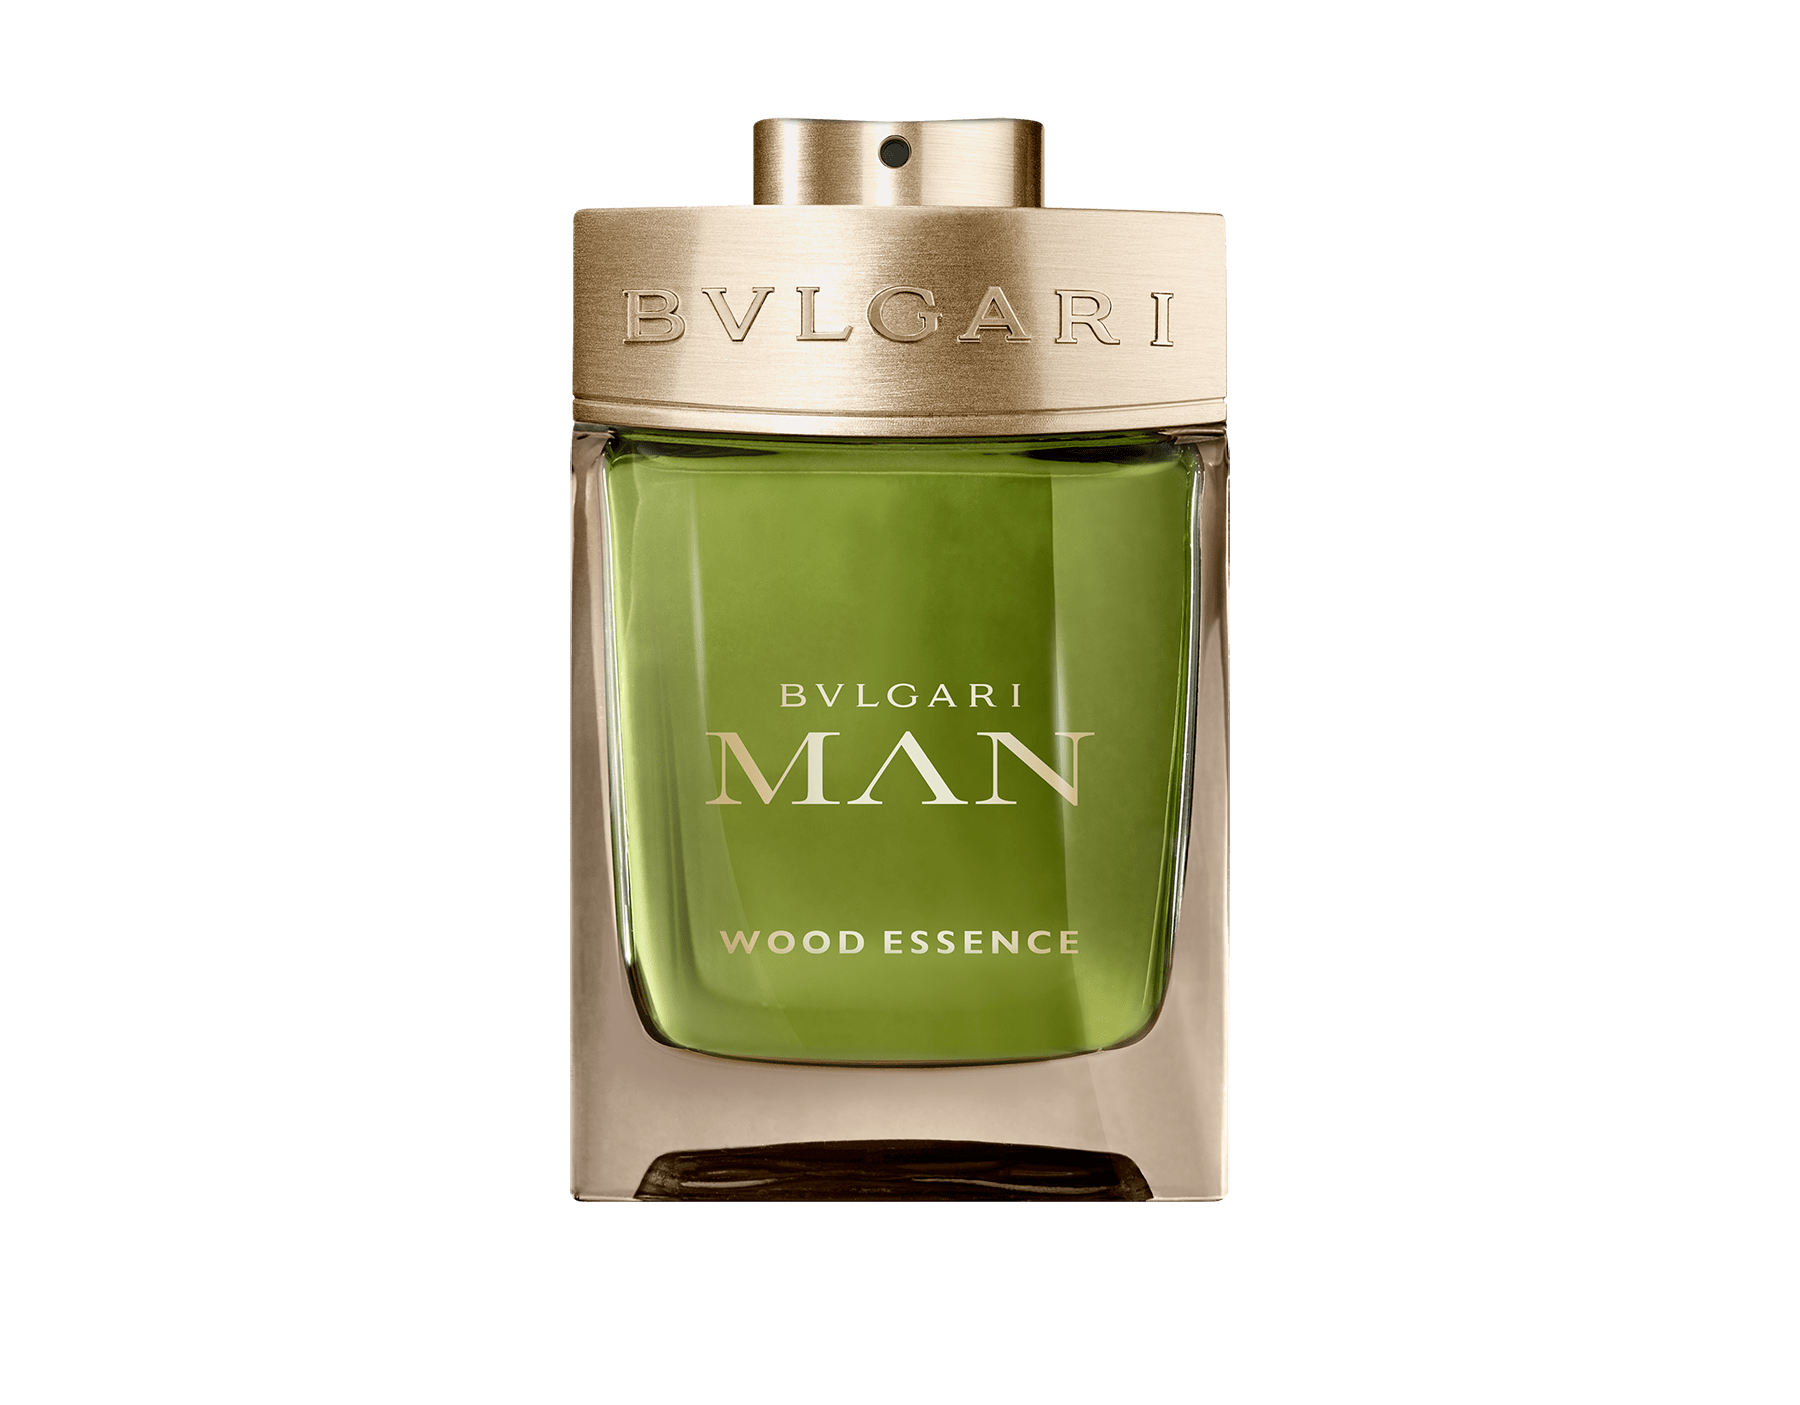 An energizing woody eau de parfum inspired by the life force found in nature. BVLGARIMANWOODESSENCE image 1